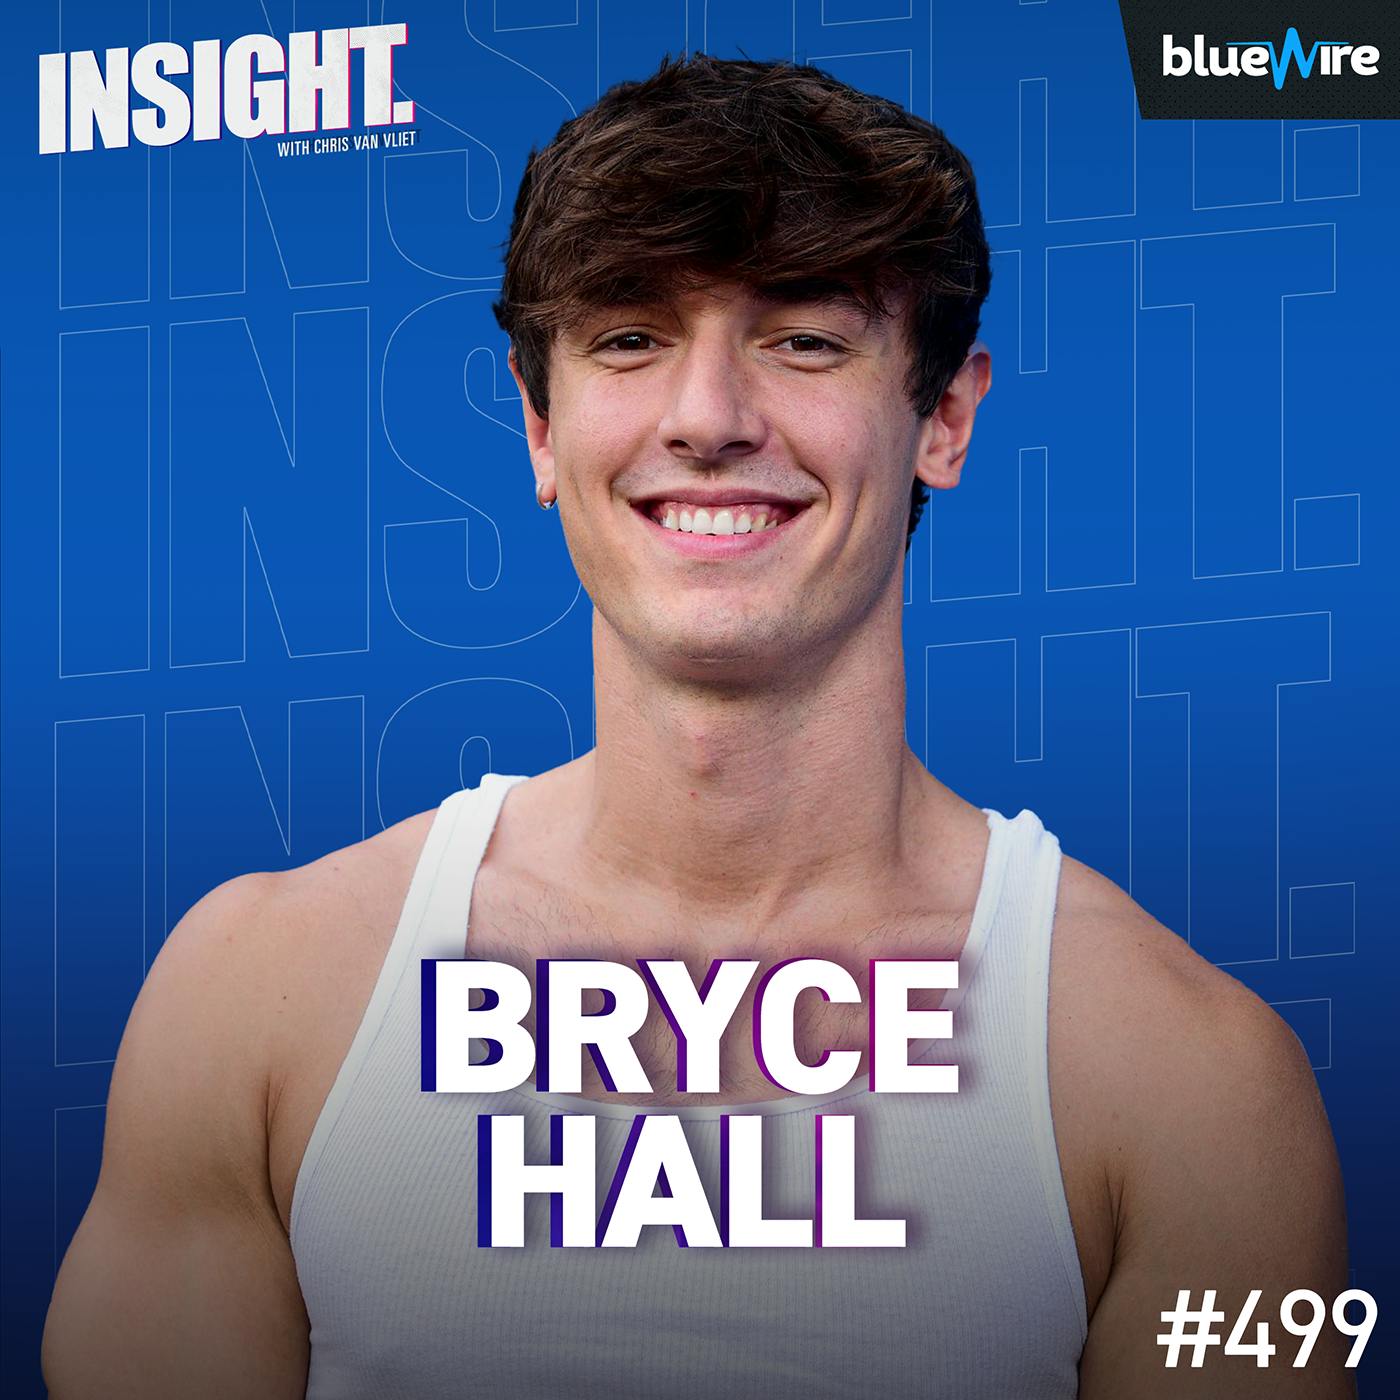 Bryce Hall - From Social Media Influencer To Bare Knuckle Boxer in BKFC